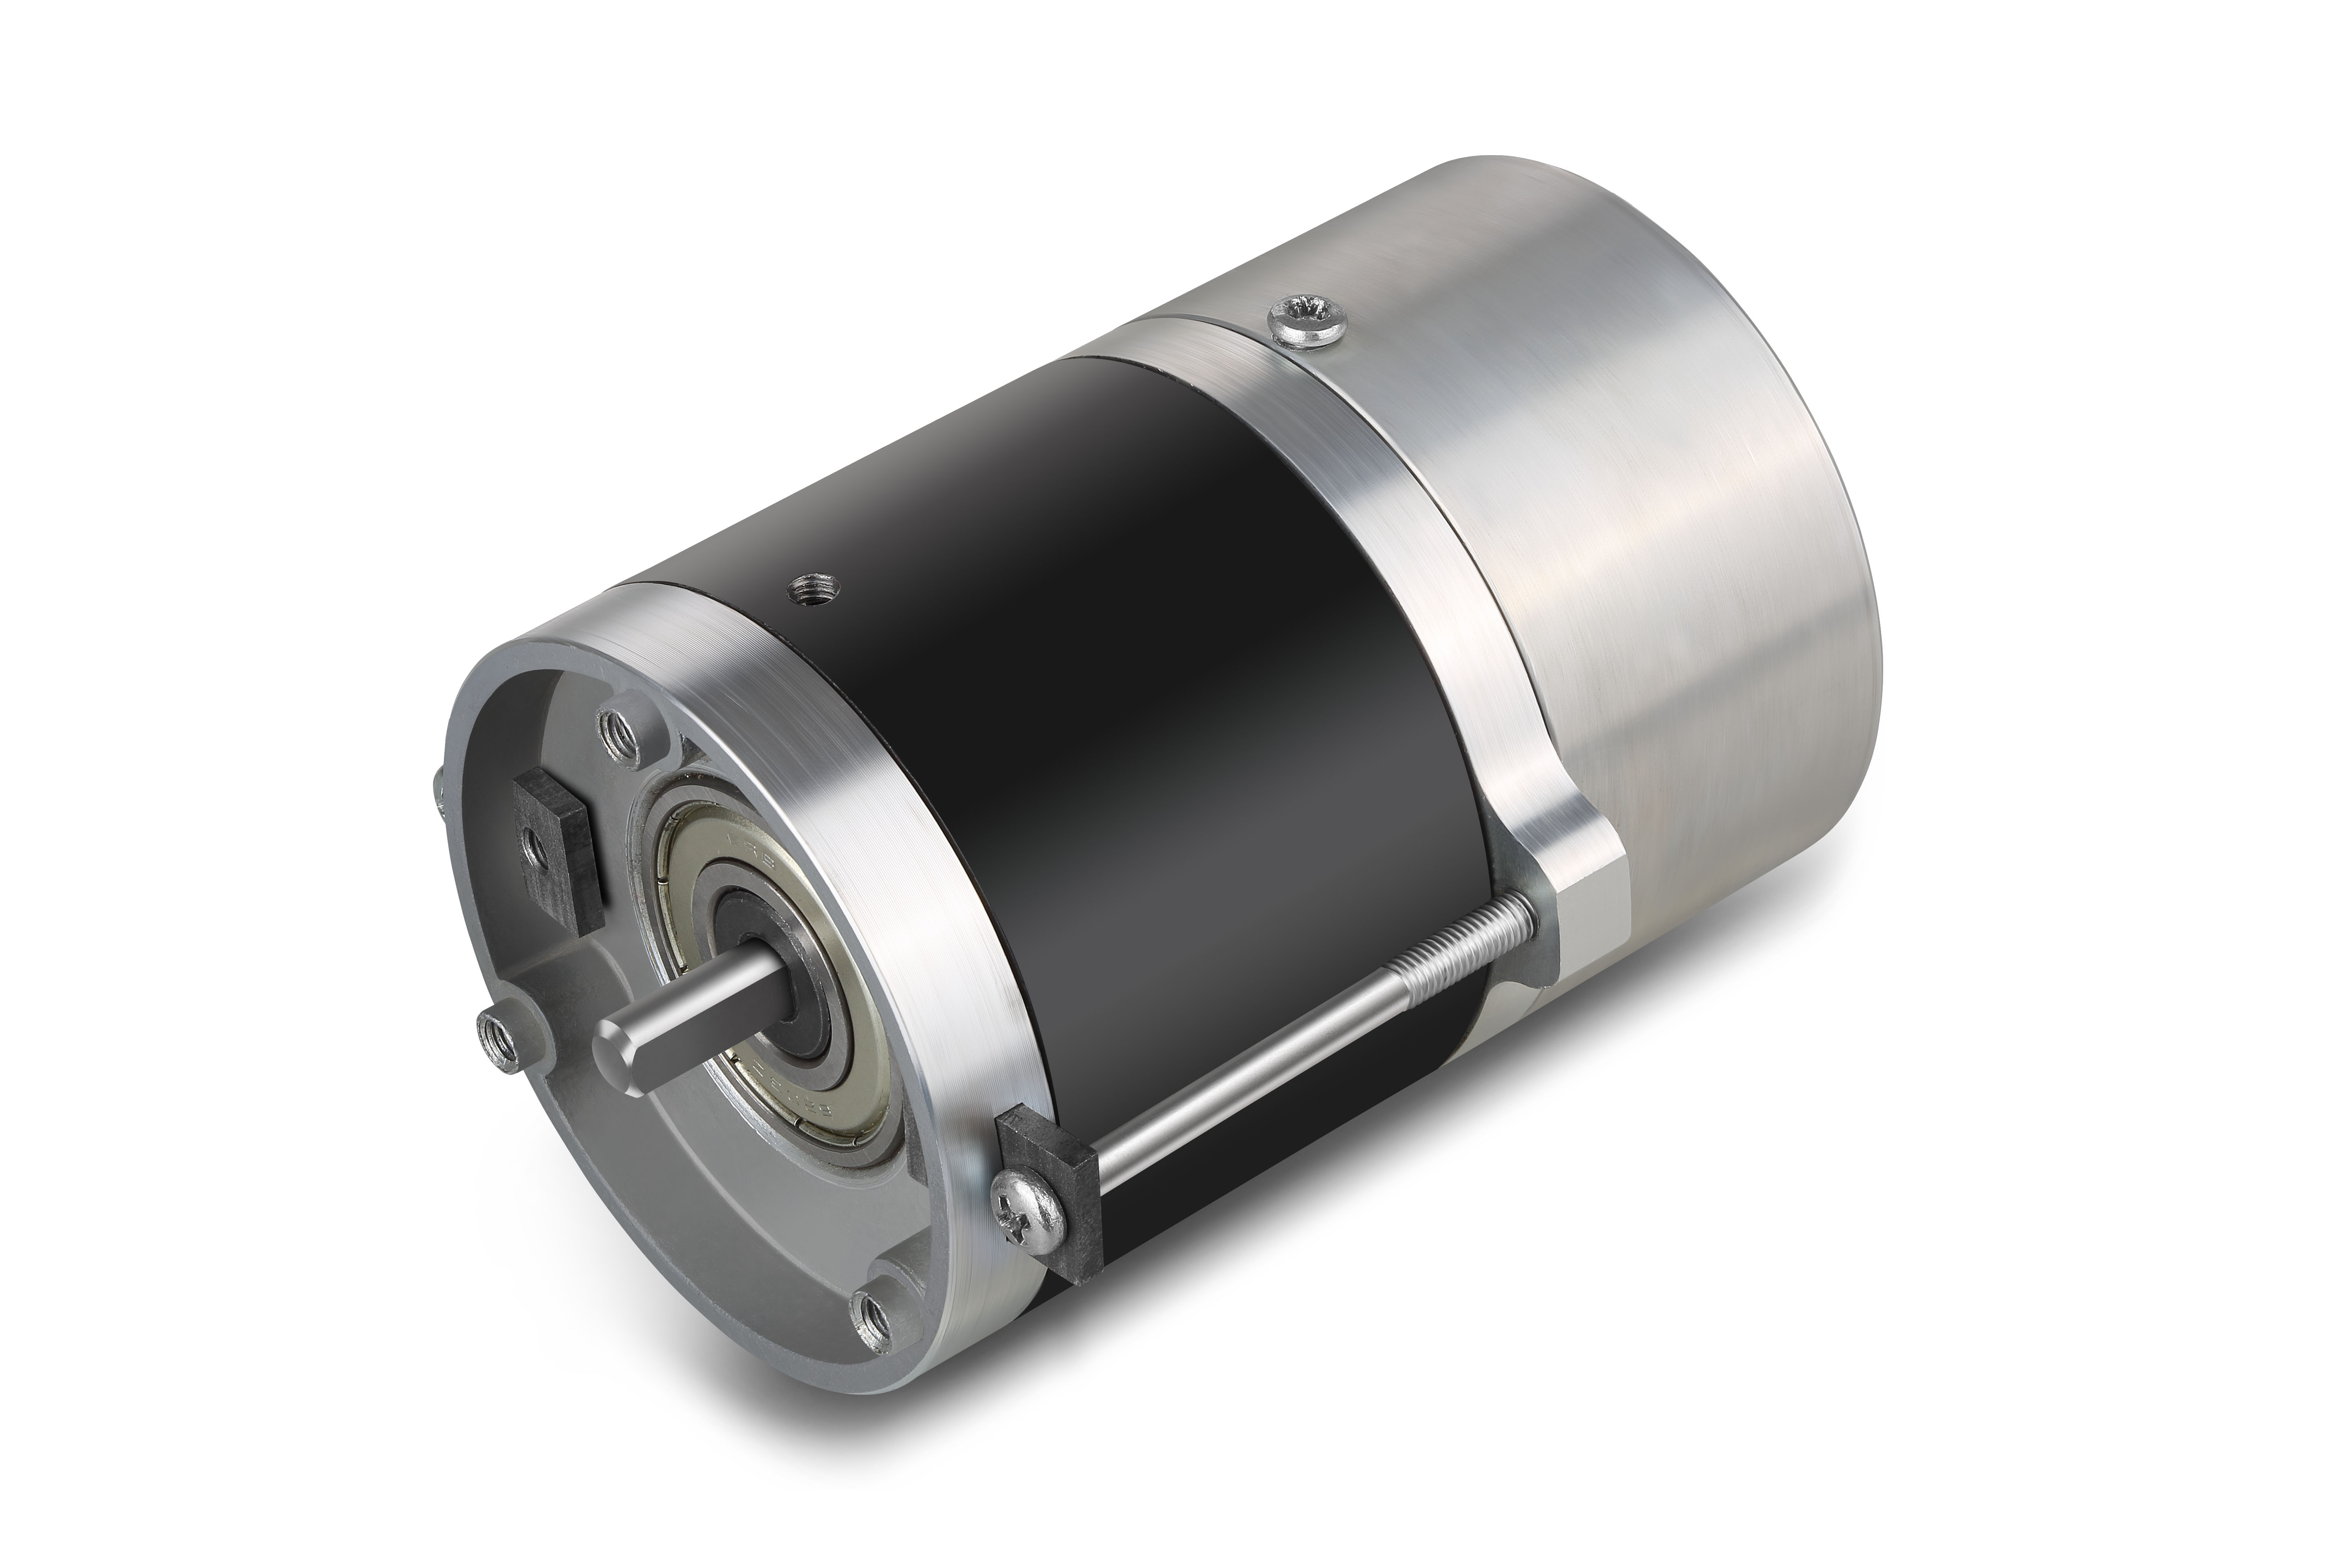 PowerMotor Launches High Efficiency Brushless DC Motors to Elevate the